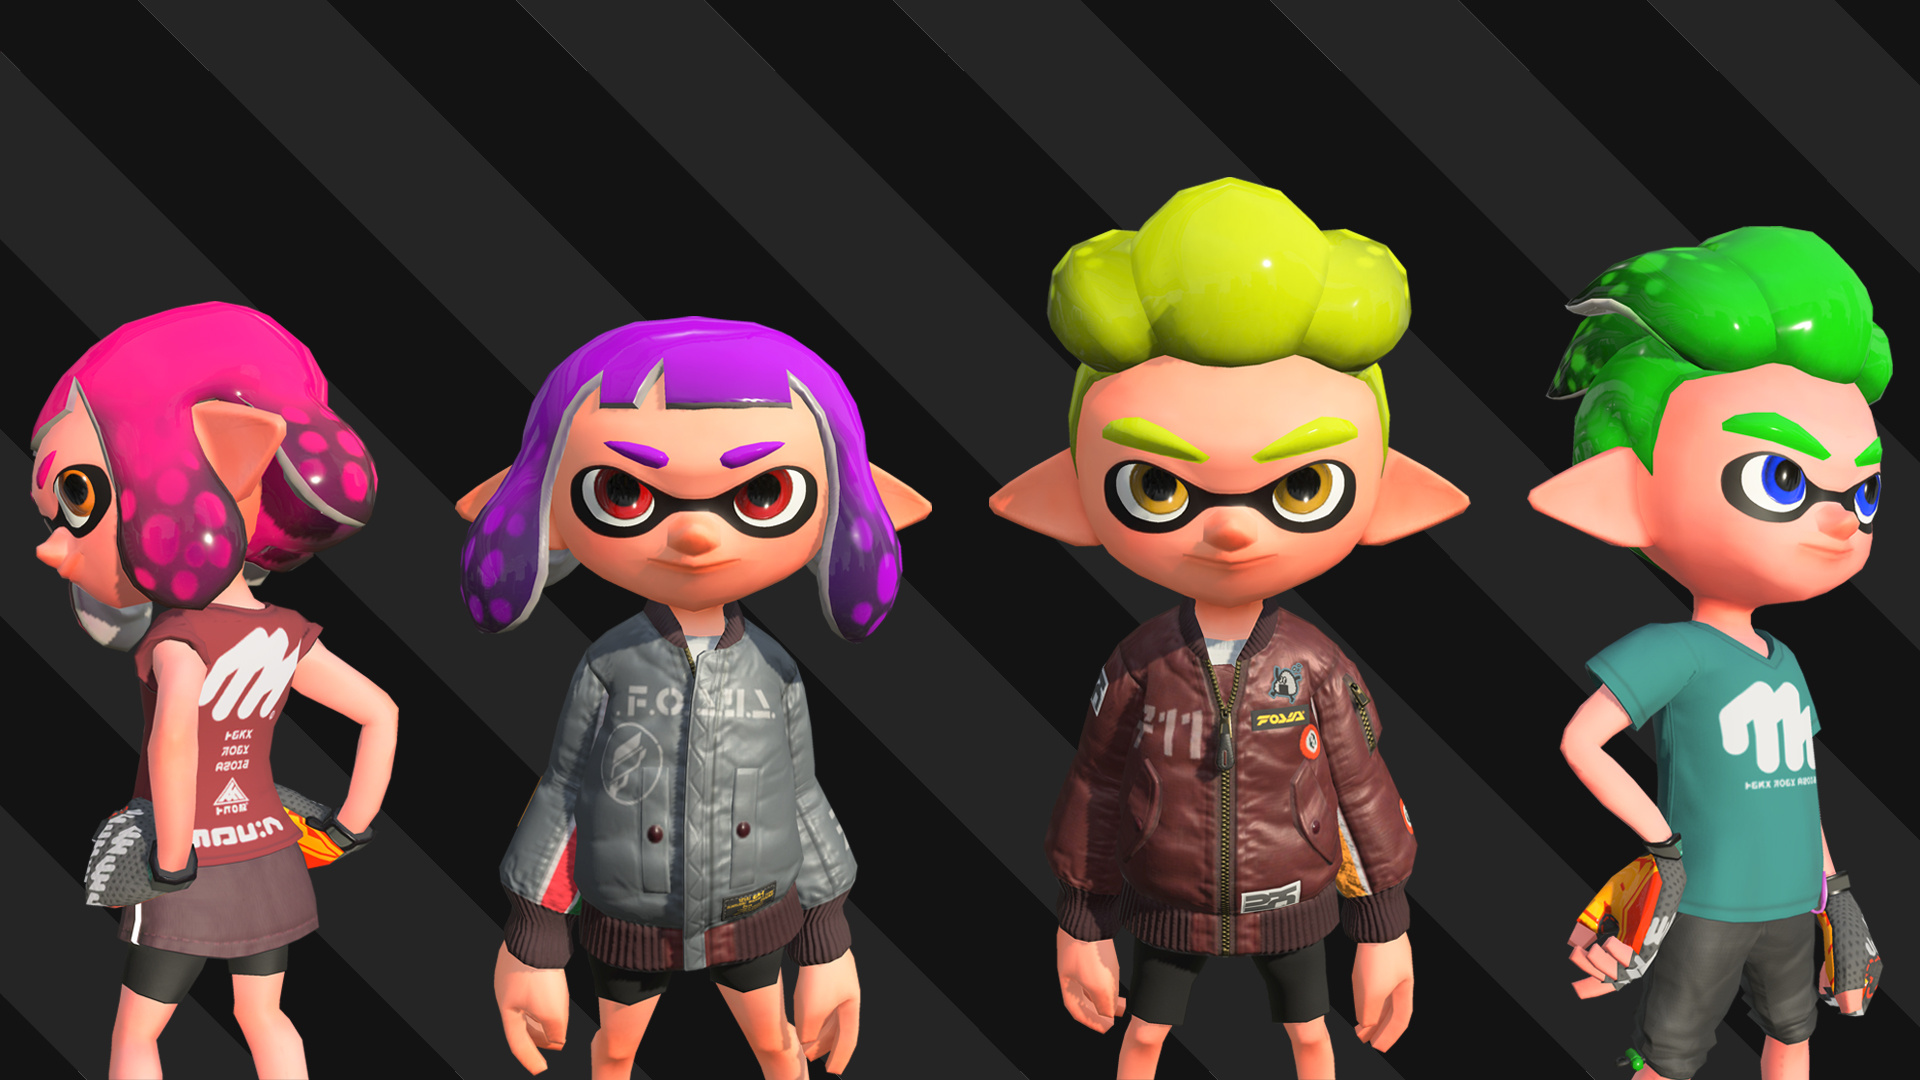 US Splatoon 21 Players Can Snag This In-Game Gear Set For Free